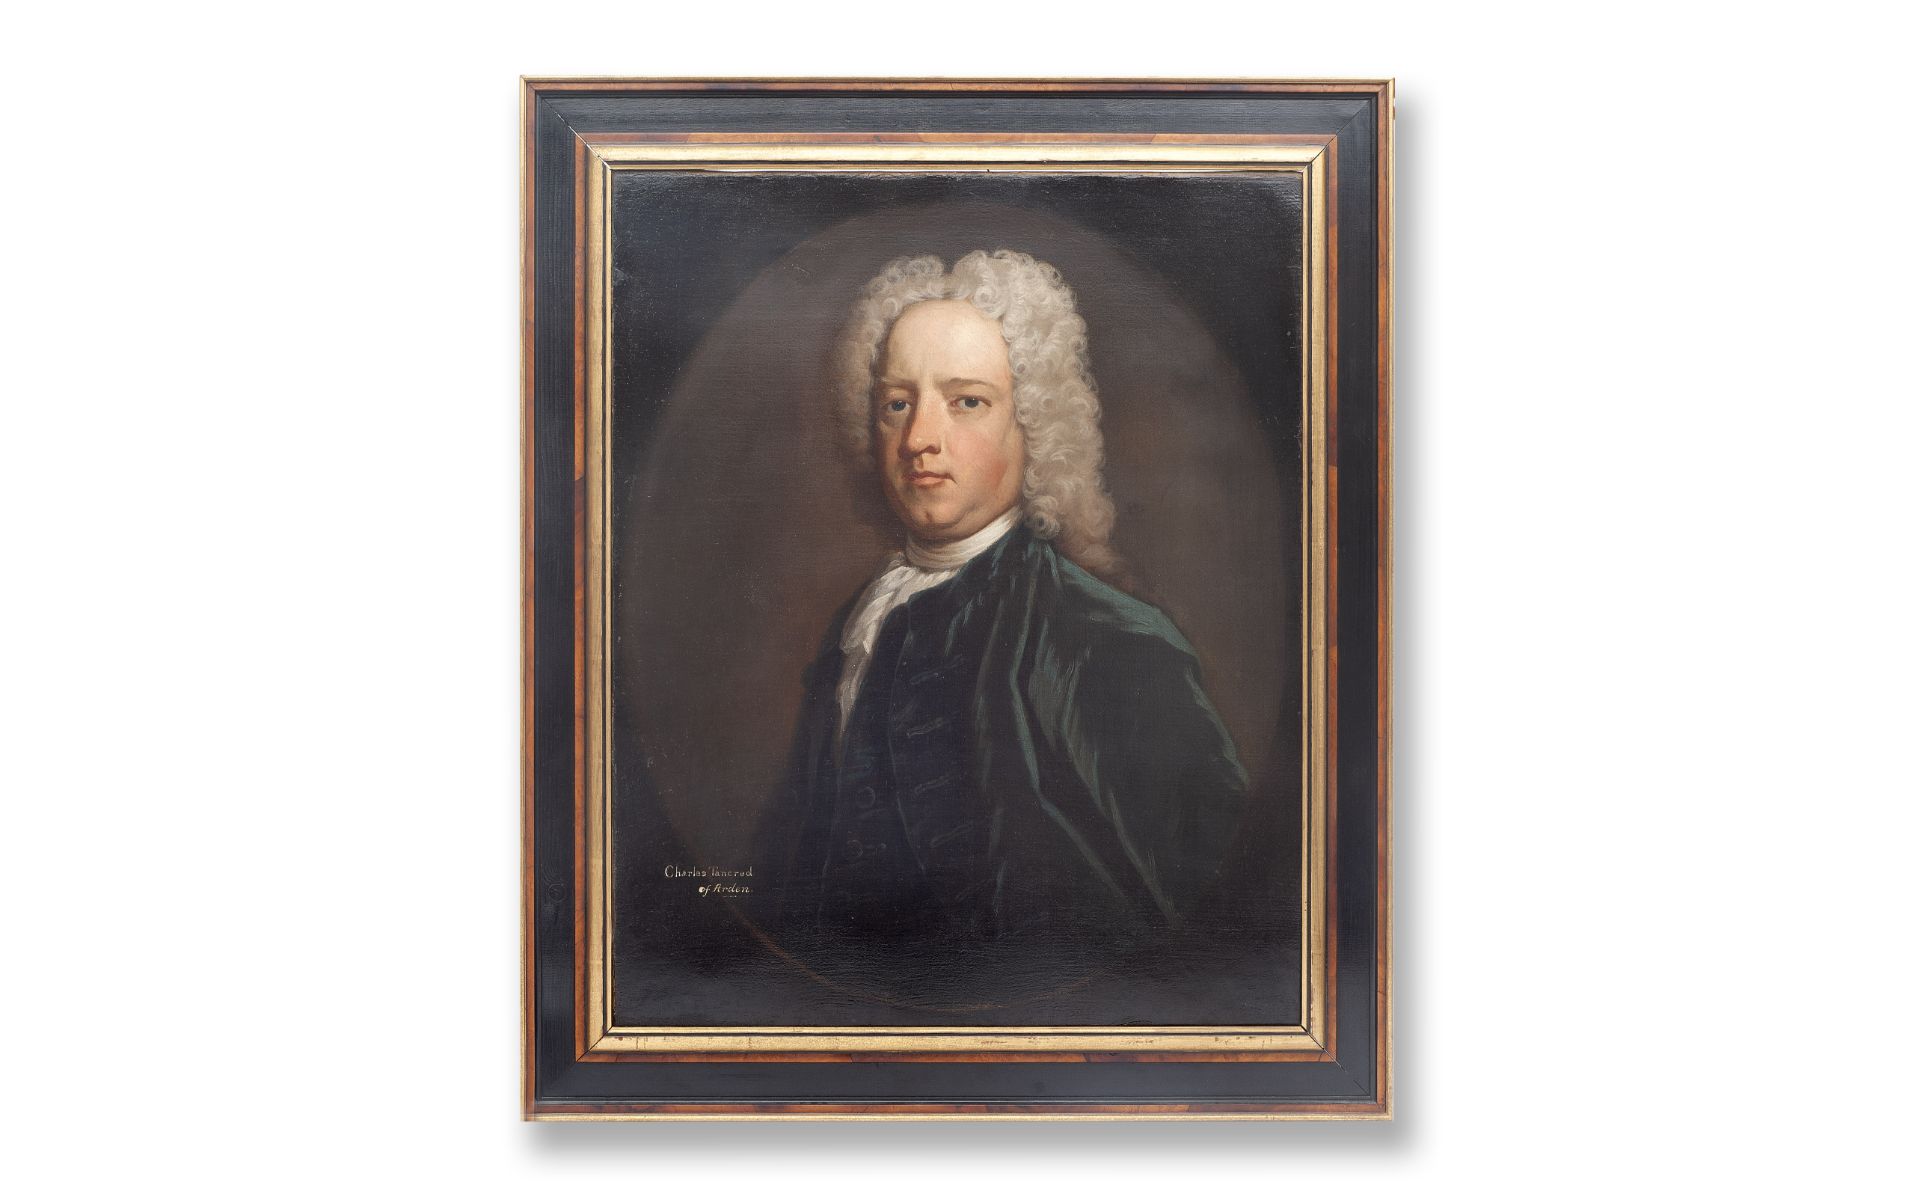 FOLLOWER OF REYNOLDS: A PORTRAIT OF CHARLES TANKRED OF ARDEN